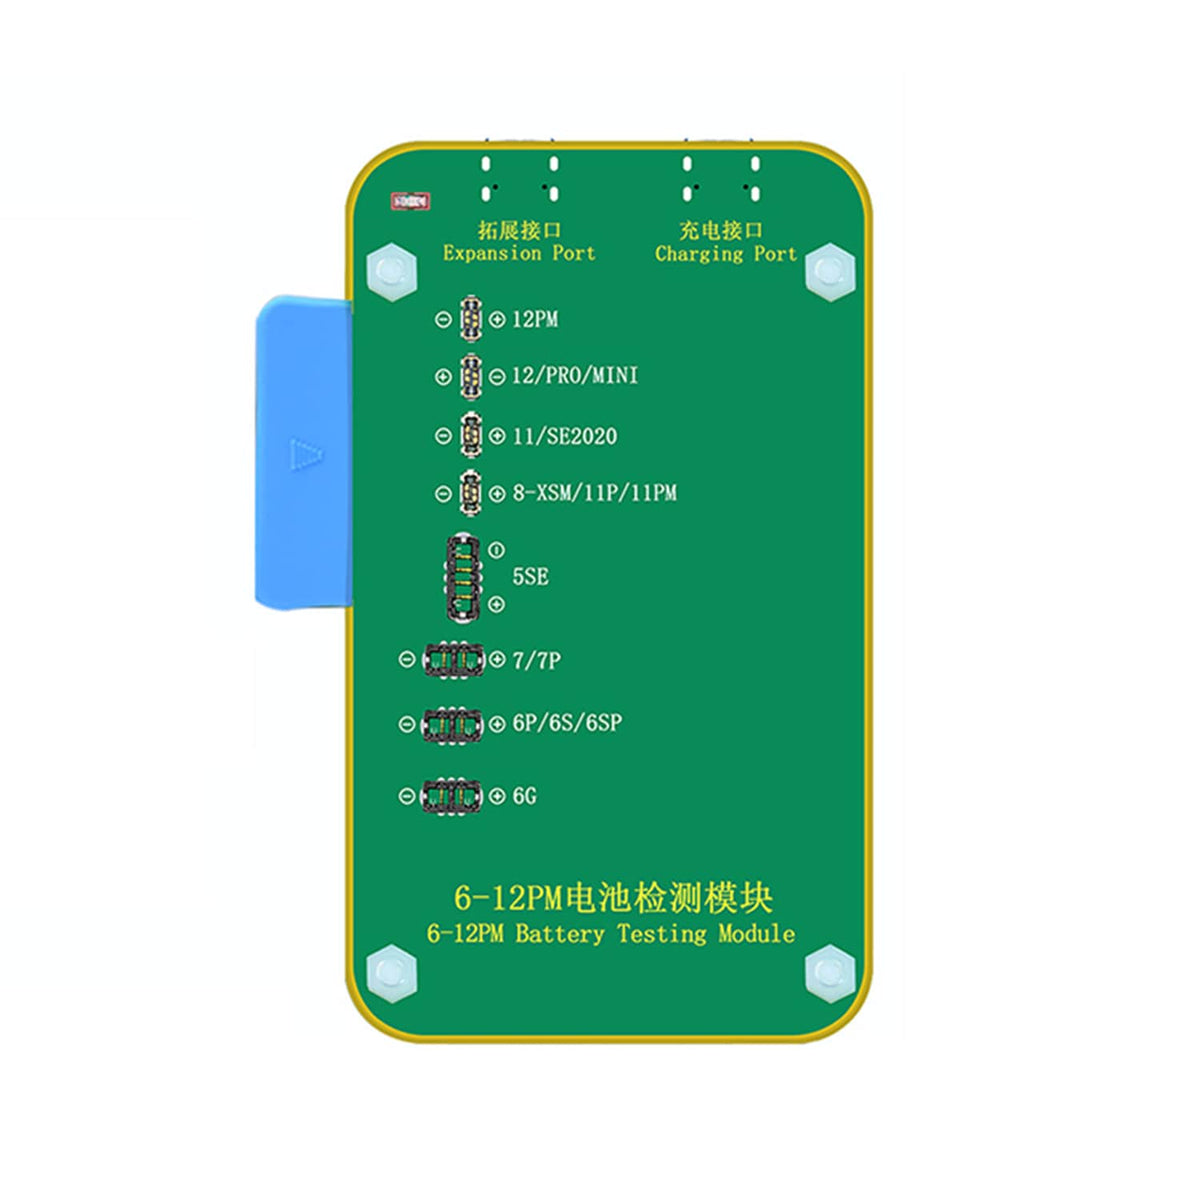 JC BATTERY DETECTION MODULE FOR IPHONE 6-12PM